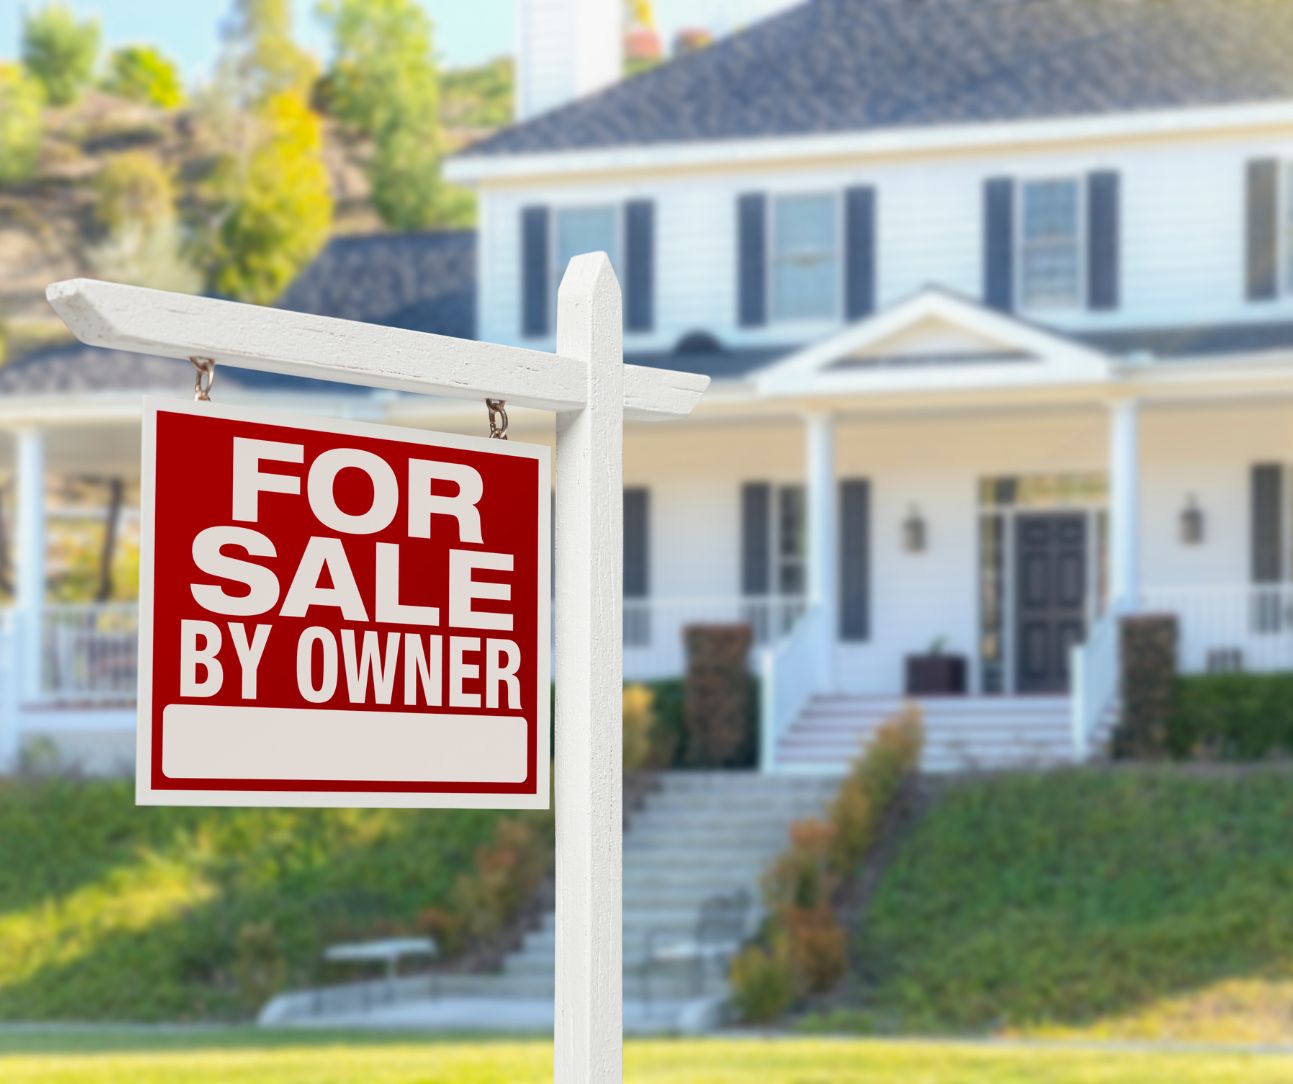 Using a Realtor Vs. For Sale By Owner: Which is Better for Selling Your Home in Tulsa?